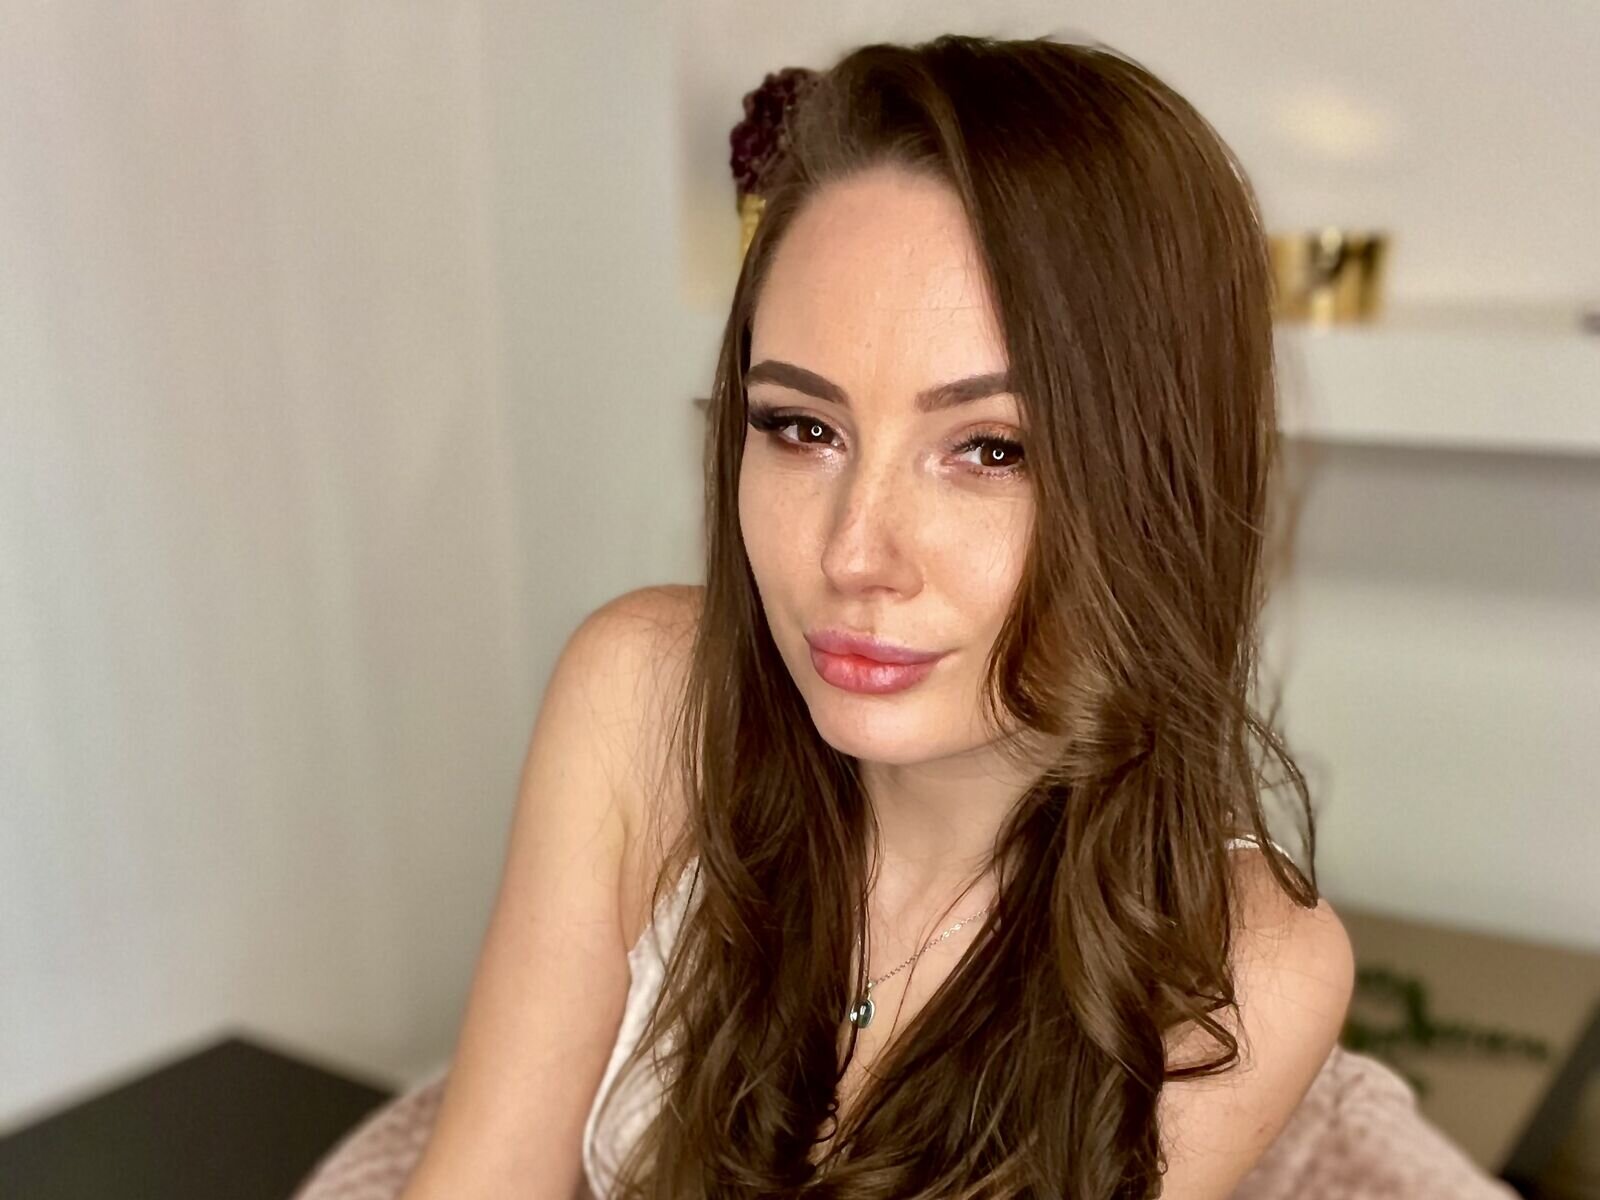 Free Live Sex Chat With MellyRose